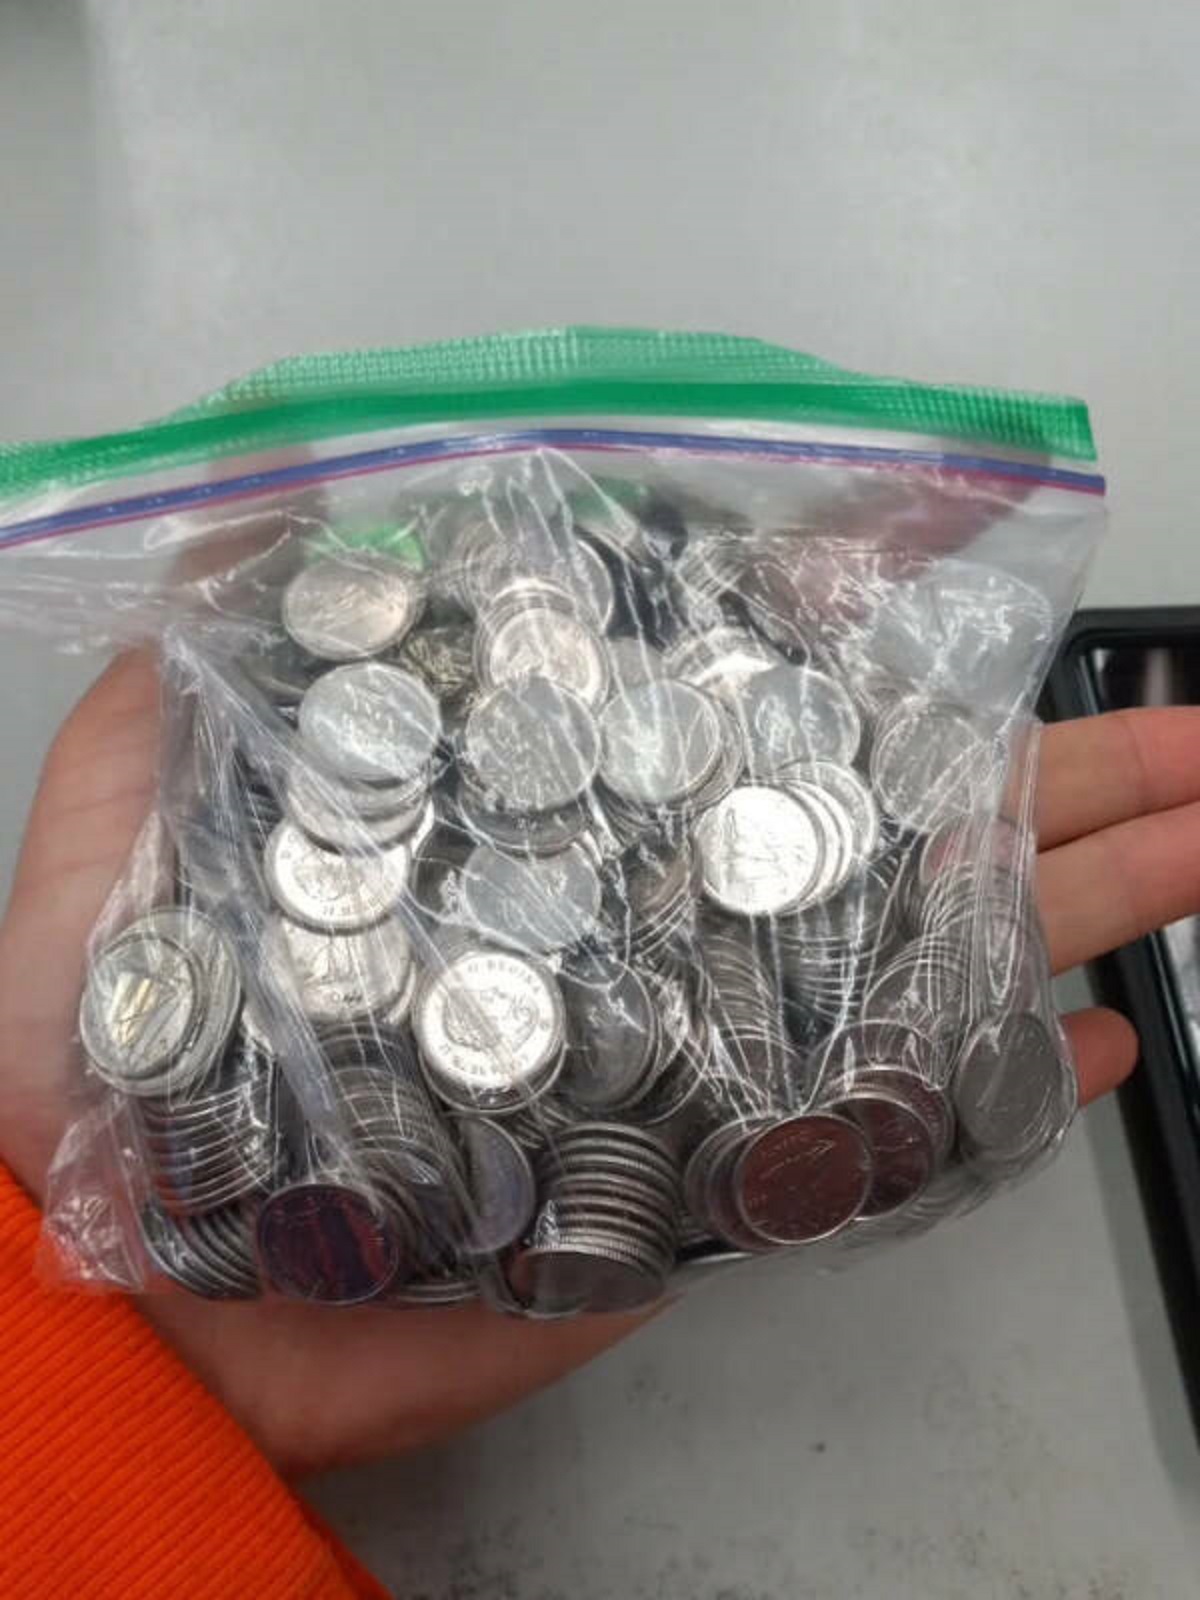 “Customer gets $60 in Diesel and pays me in dimes.”